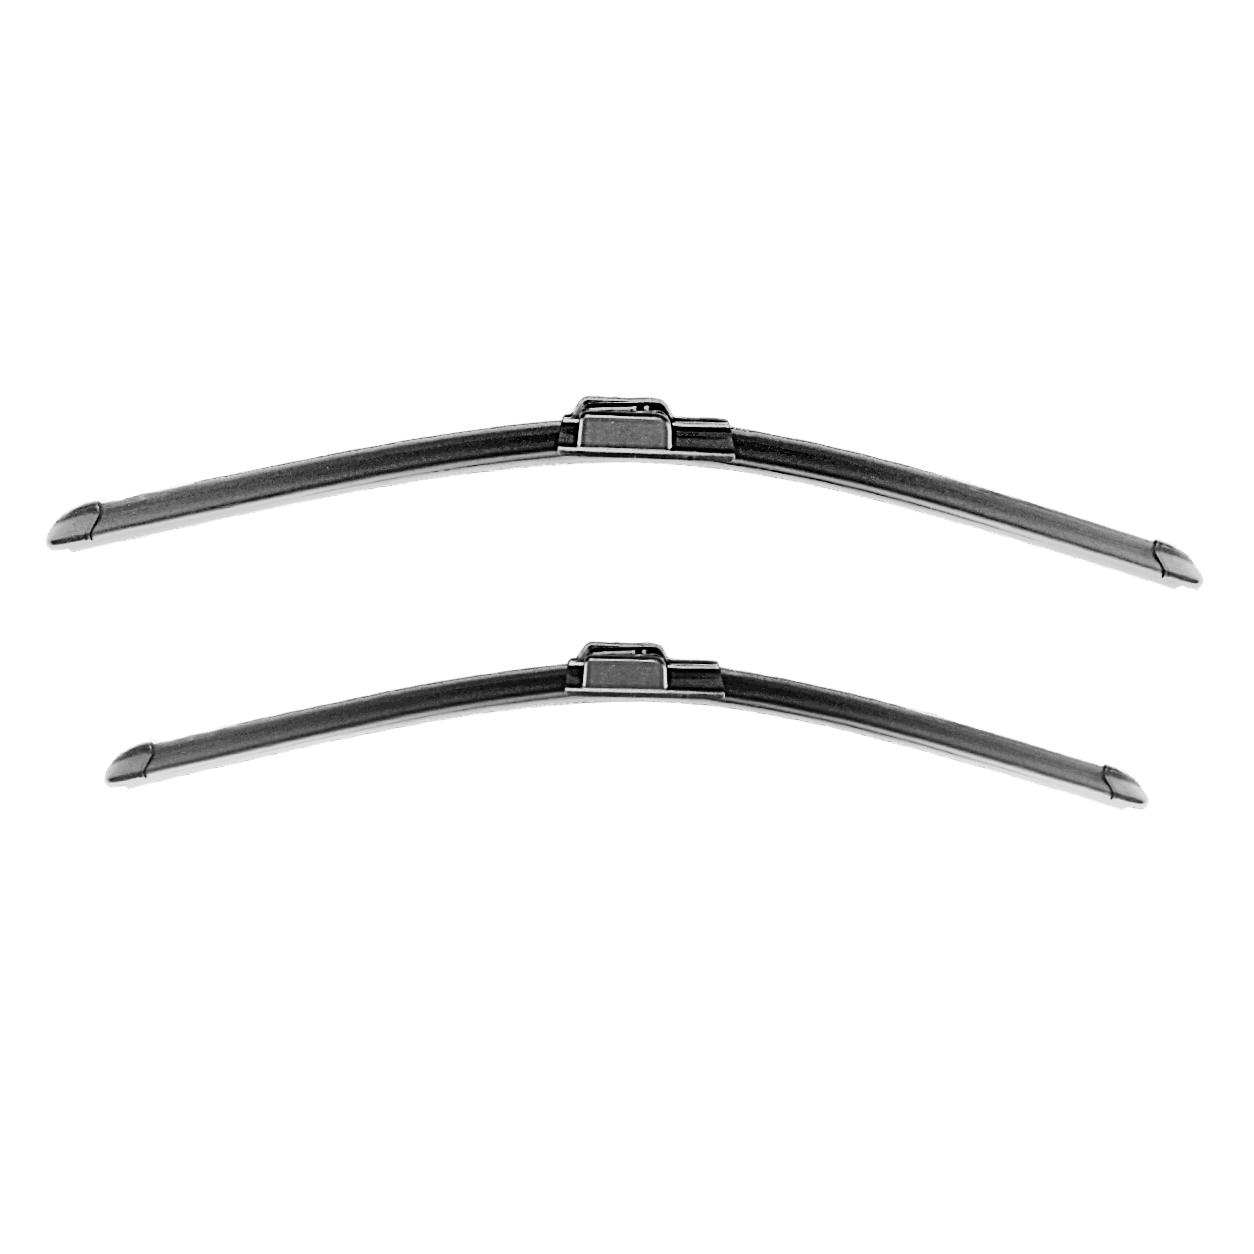 Toyota Hilux 1989-1997 Ute Replacement Wiper Blades